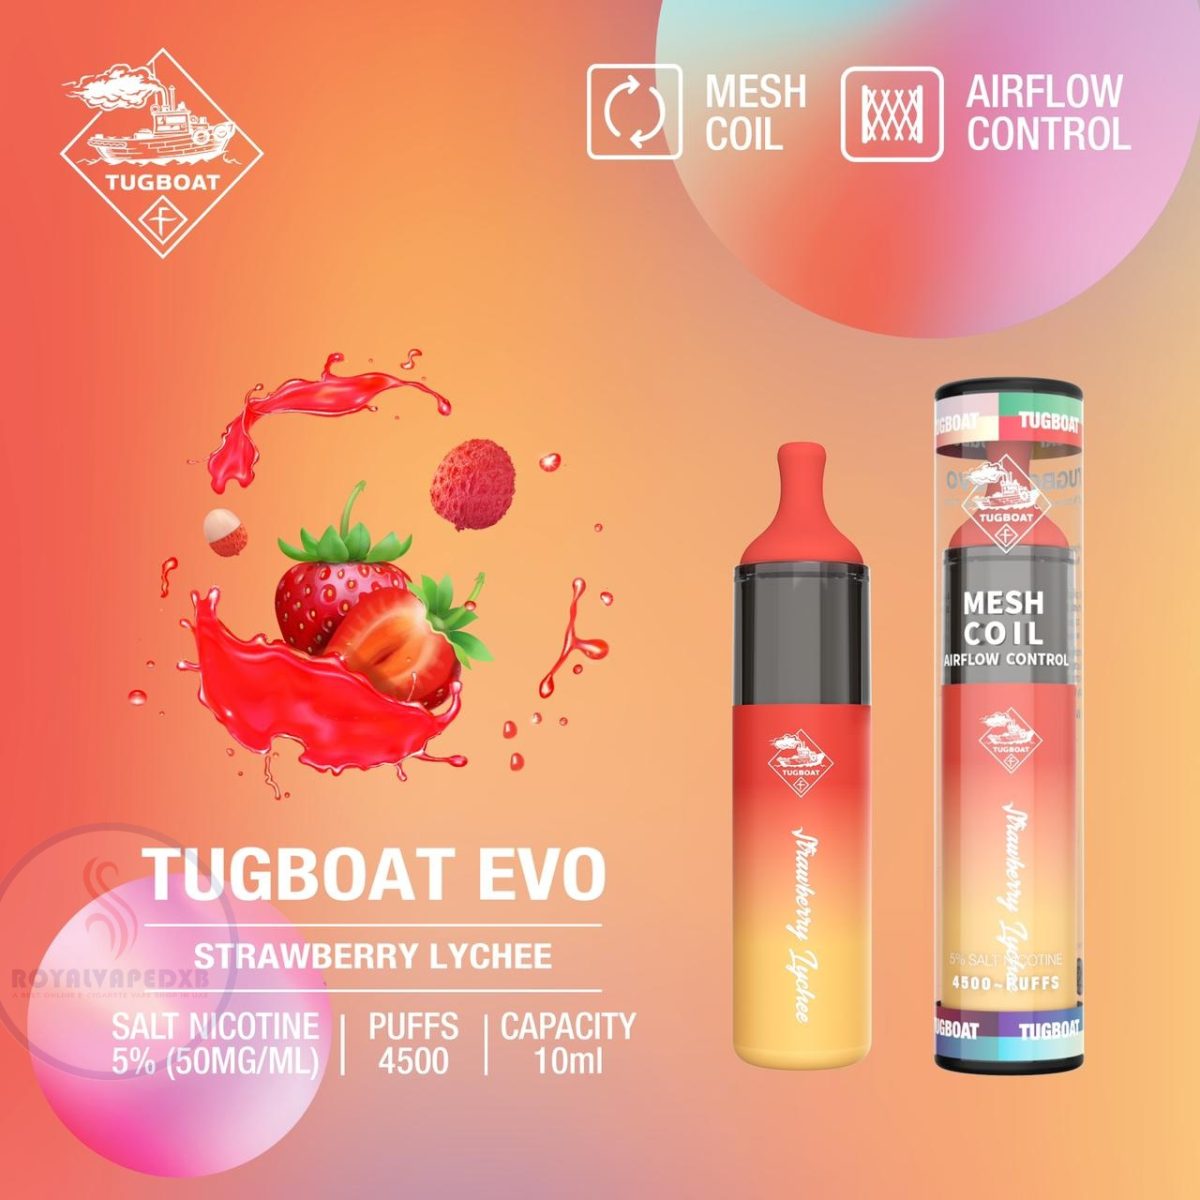 Tugboat Evo 4500 Puffs Disposable Vape Strawberry Lychee